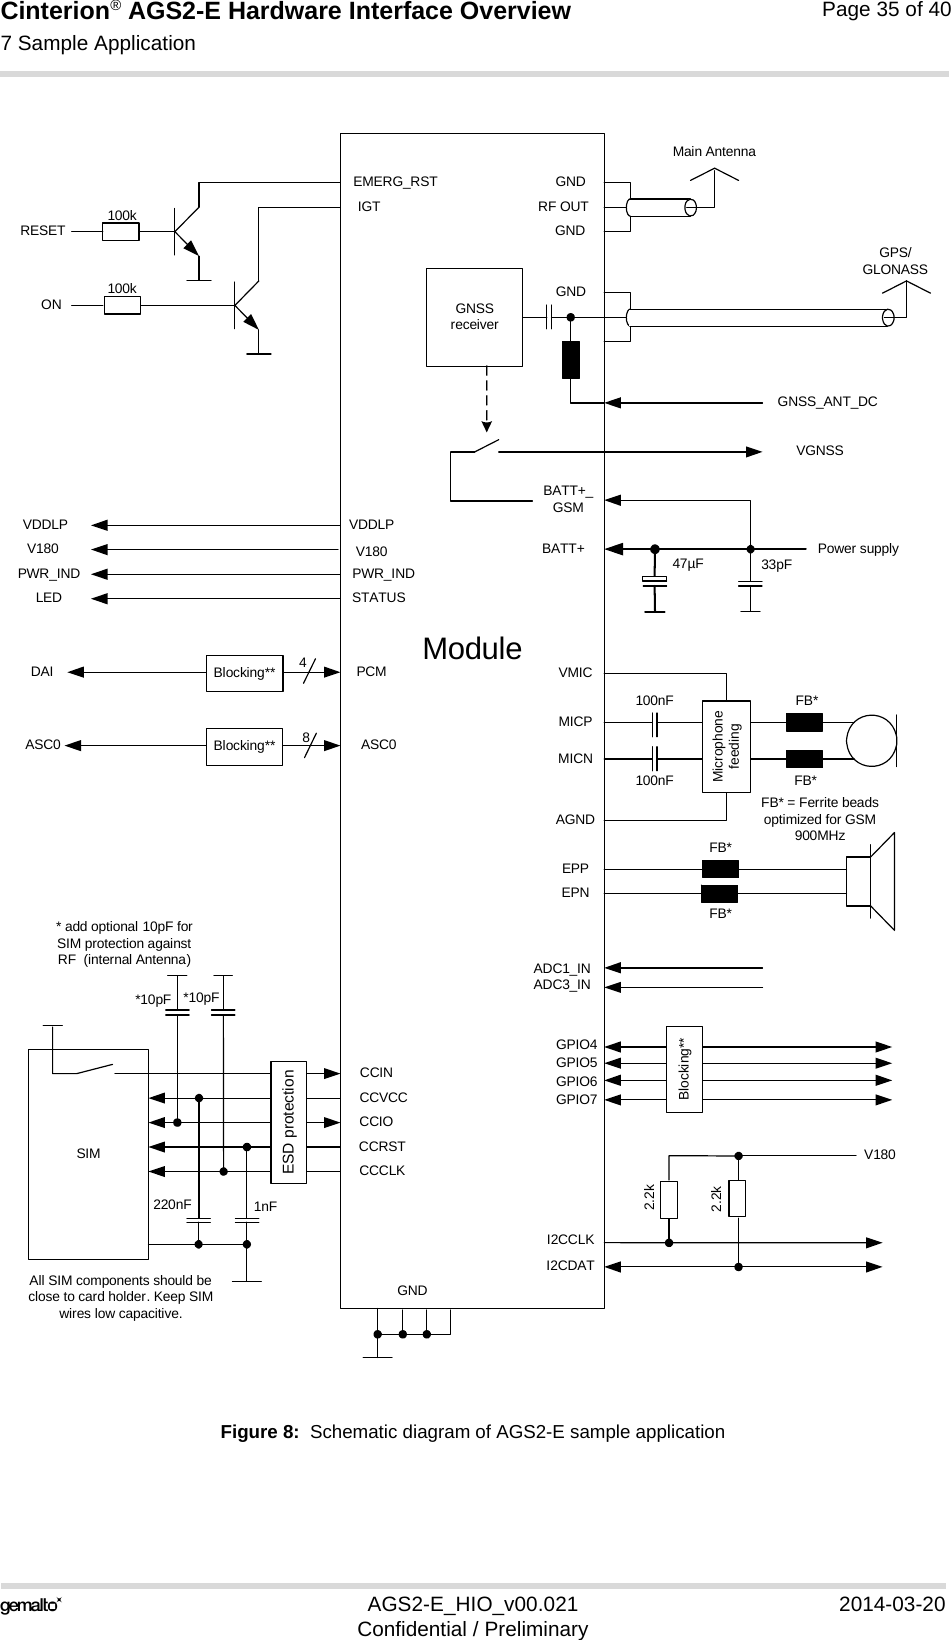 Cinterion® AGS2-E Hardware Interface Overview7 Sample Application35AGS2-E_HIO_v00.021 2014-03-20Confidential / PreliminaryPage 35 of 40Figure 8:  Schematic diagram of AGS2-E sample applicationEMERG_RSTPWR_INDV180RESETASC0ASC0 8100nF100nFMicrophonefeedingFB*FB*FB*FB*VMICMICPMICNAGNDEPPEPNV180CCVCCCCIOCCCLKCCINCCRSTSIM220nF 1nFI2CCLKI2CDAT2.2kV180GPIO4GPIO5 GPIO6GPIO7GNDGNDGNDRF OUTBATT+_GSMPower supplyMain AntennaModuleFB* = Ferrite beads optimized for GSM 900MHzAll SIM components should be close to card holder. Keep SIM wires low capacitive.*10pF *10pF* add optional 10pF for SIM protection against RF  (internal Antenna)47µF 33pFBlocking**Blocking**VDDLPVDDLPPWR_INDIGTONBATT+PCMDAI  4Blocking**GNDGNSS_ANT_DCGPS/GLONASSGNSSreceiver100k100k2.2kSTATUSLEDADC1_INADC3_INVGNSSESD protection